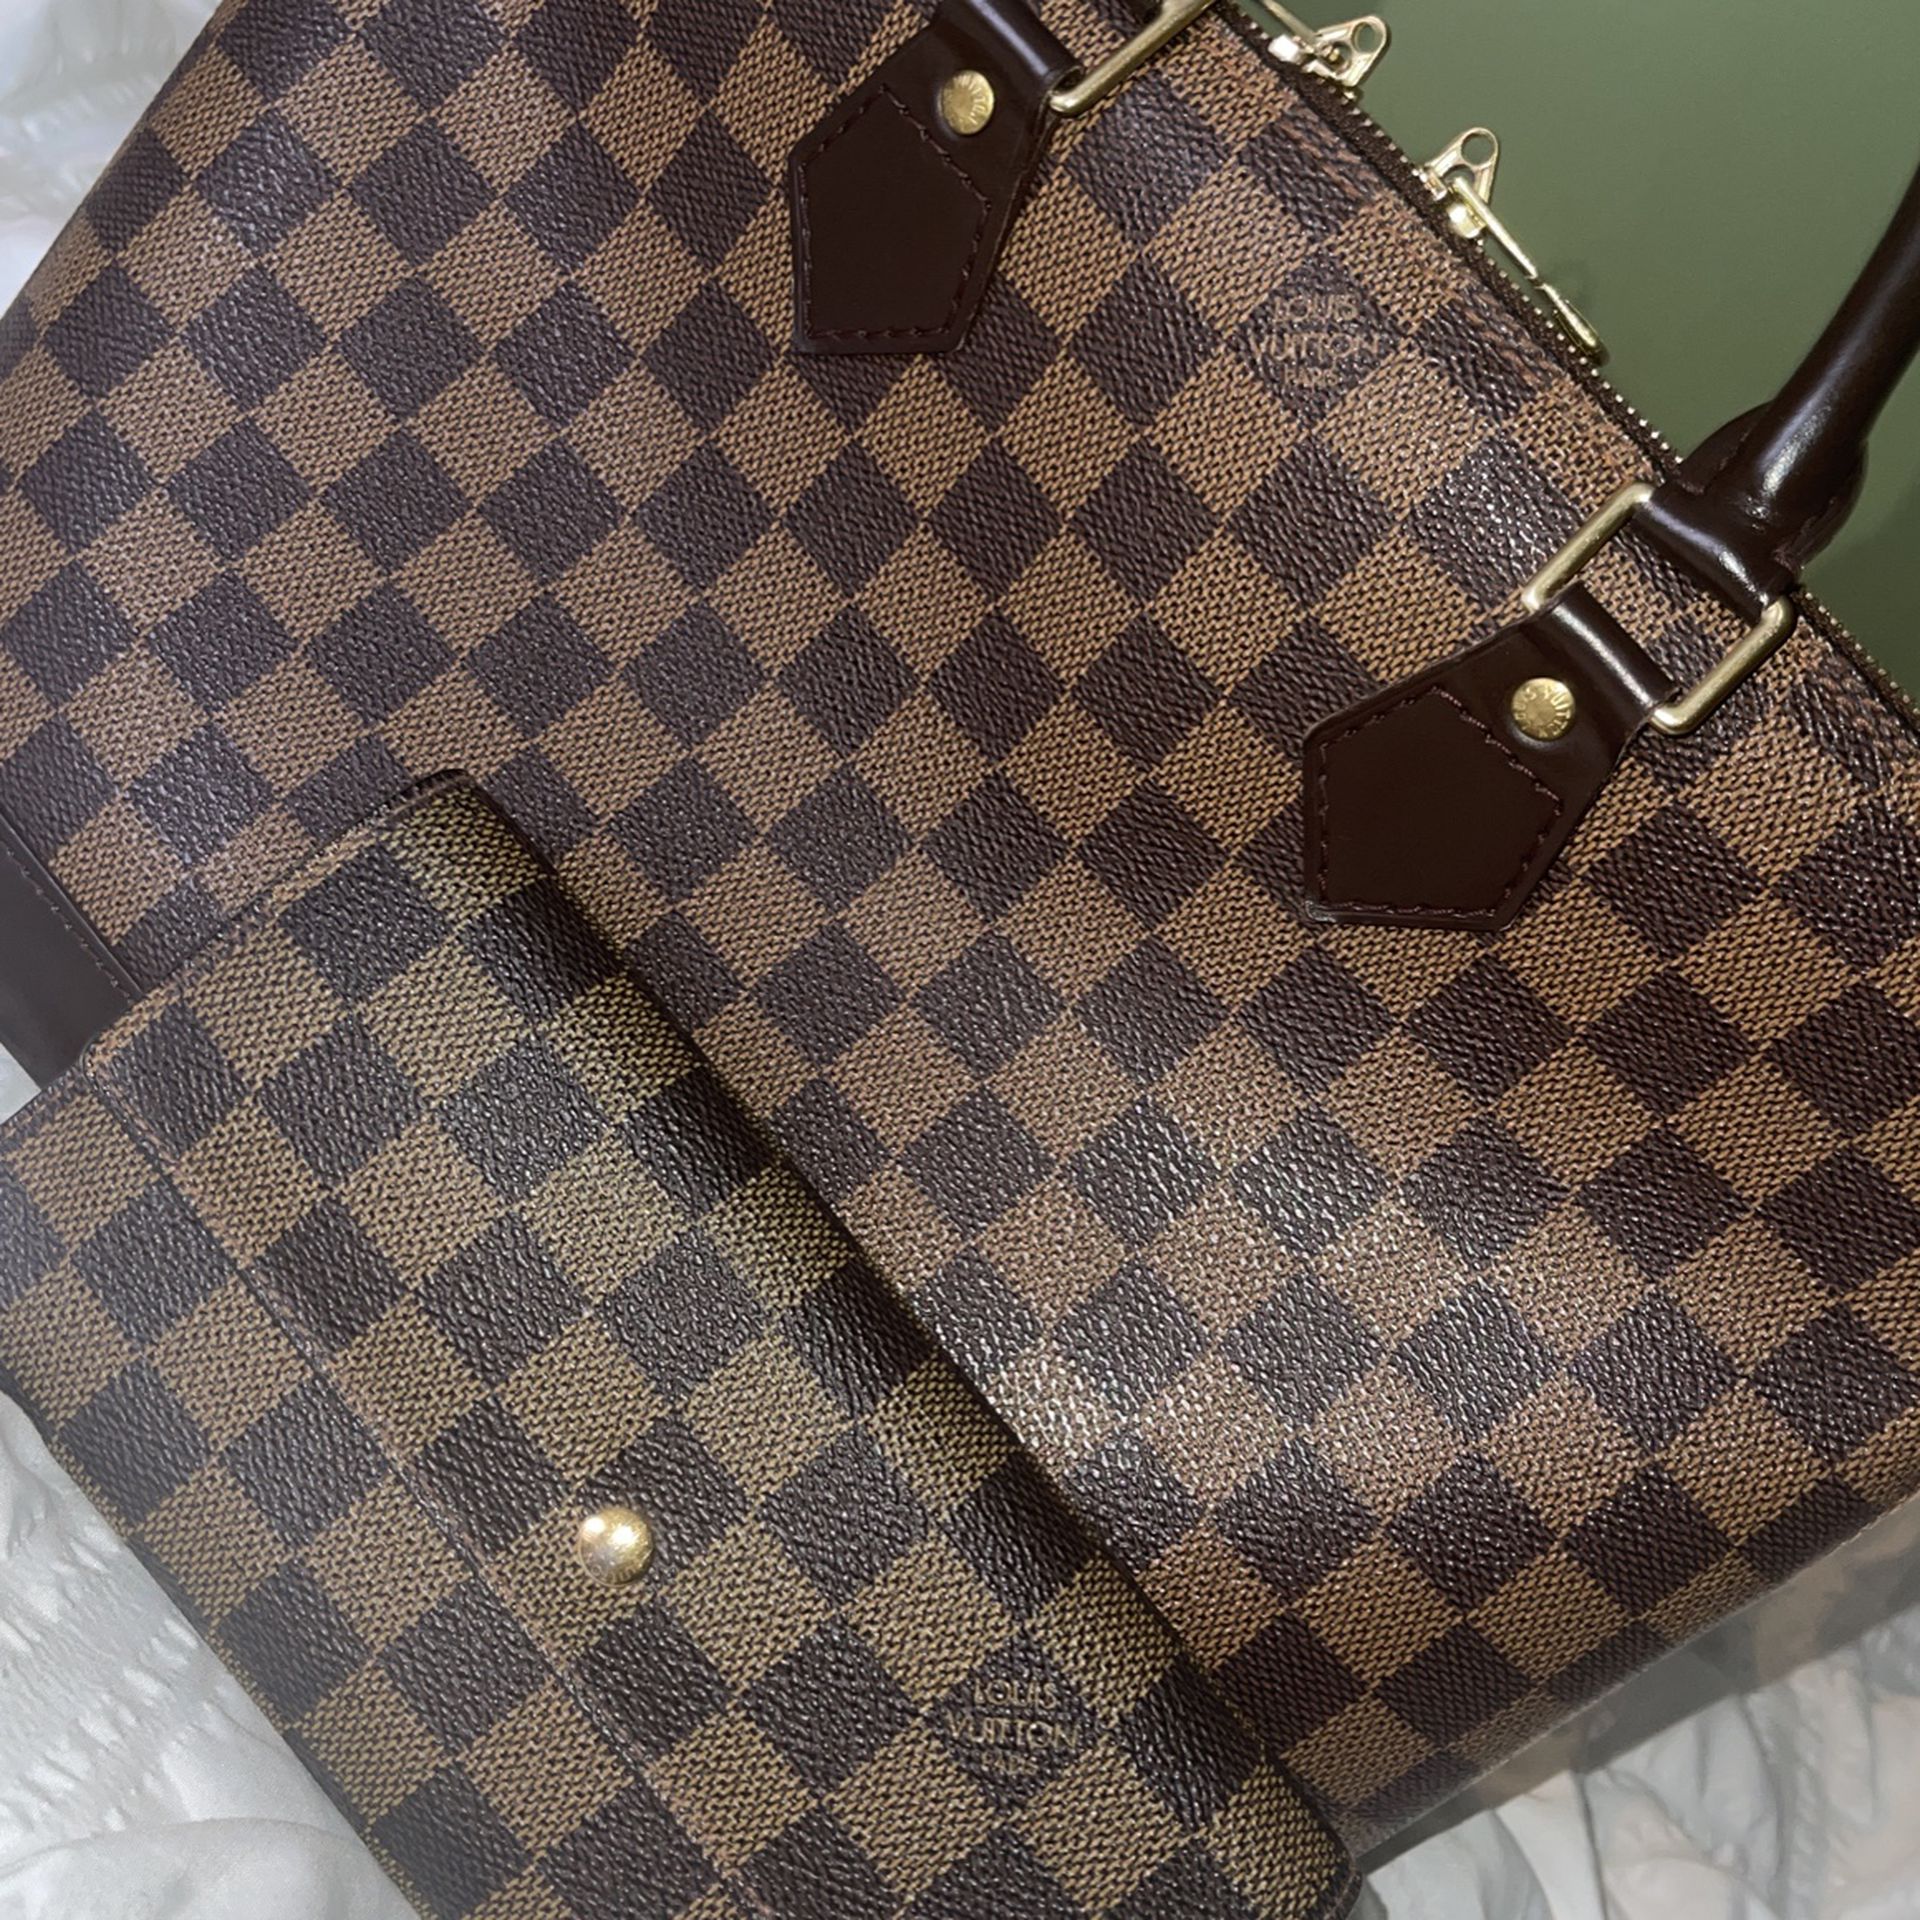 Refurbishing Louis Vuitton, Chanel or Gucci bags? Young KSU expert offers  tips for resale 